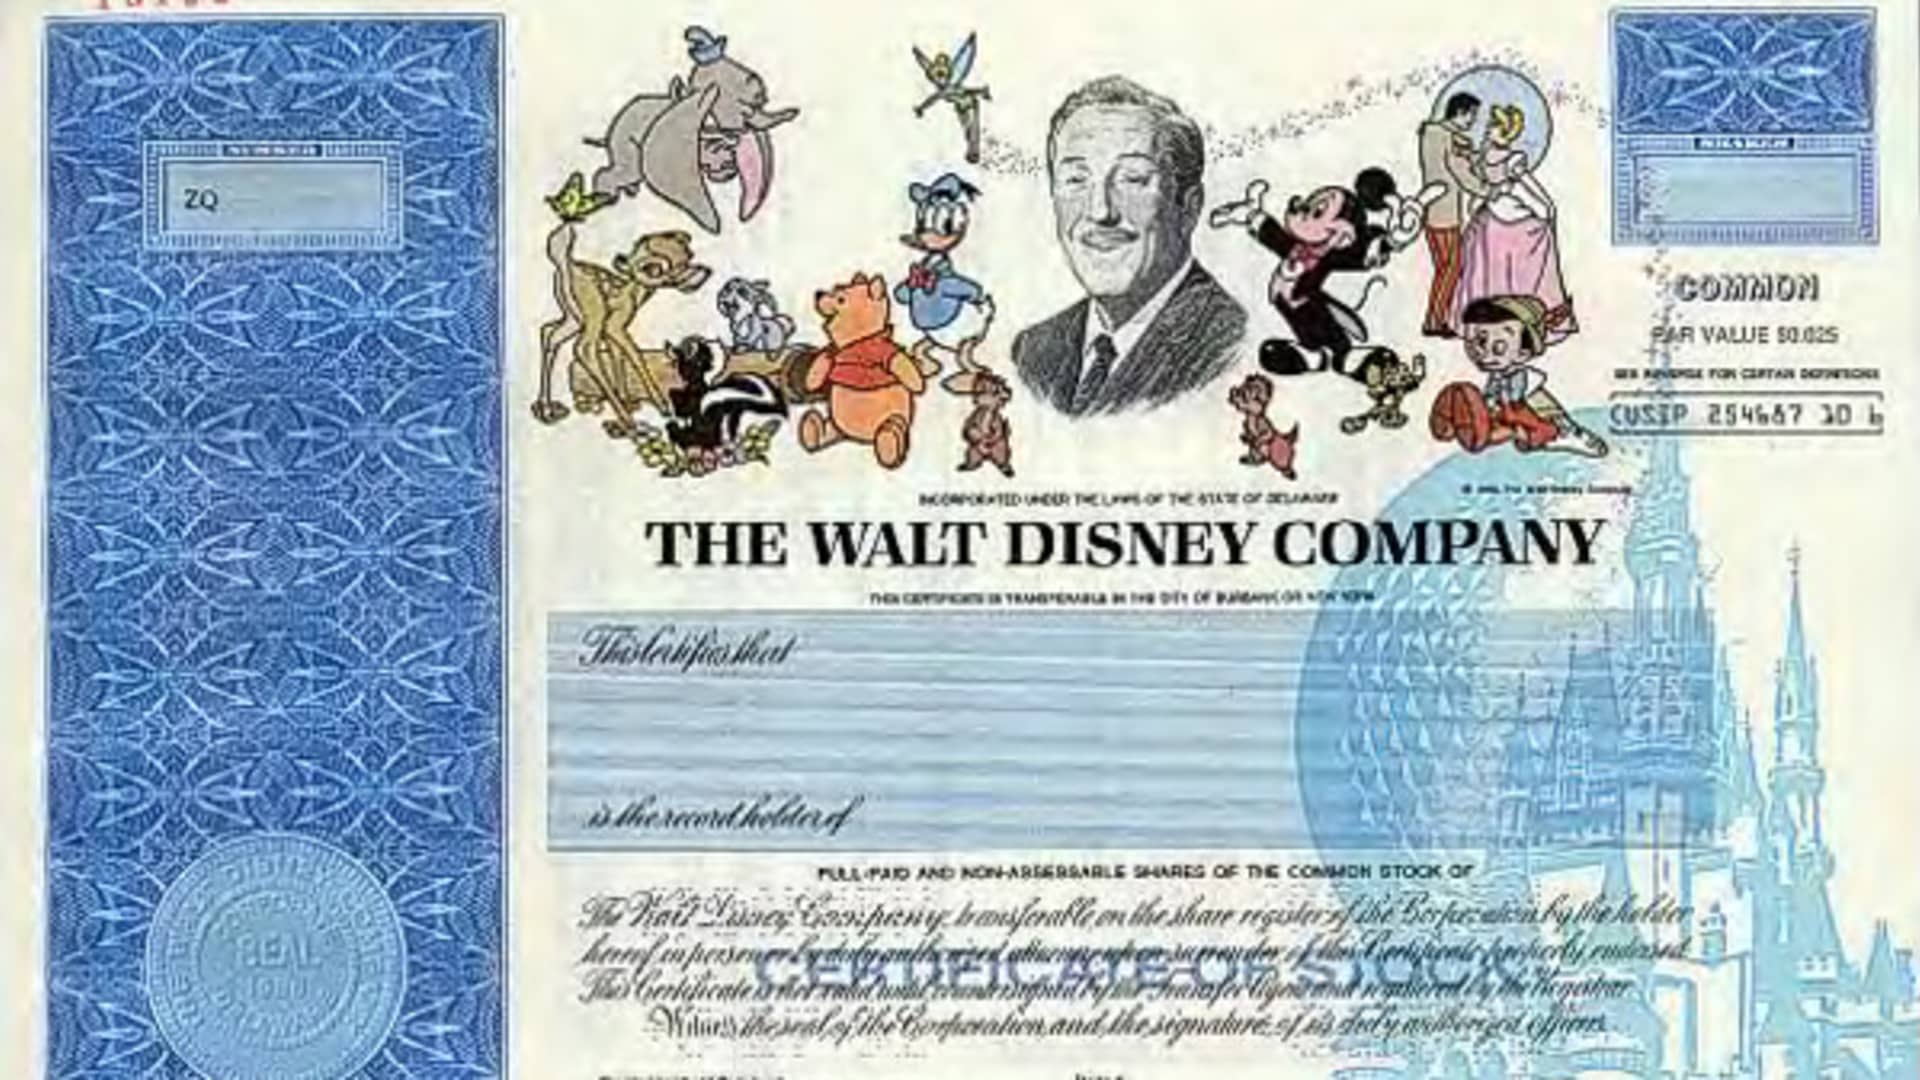 Disney stock certificates replaced by digital certificates